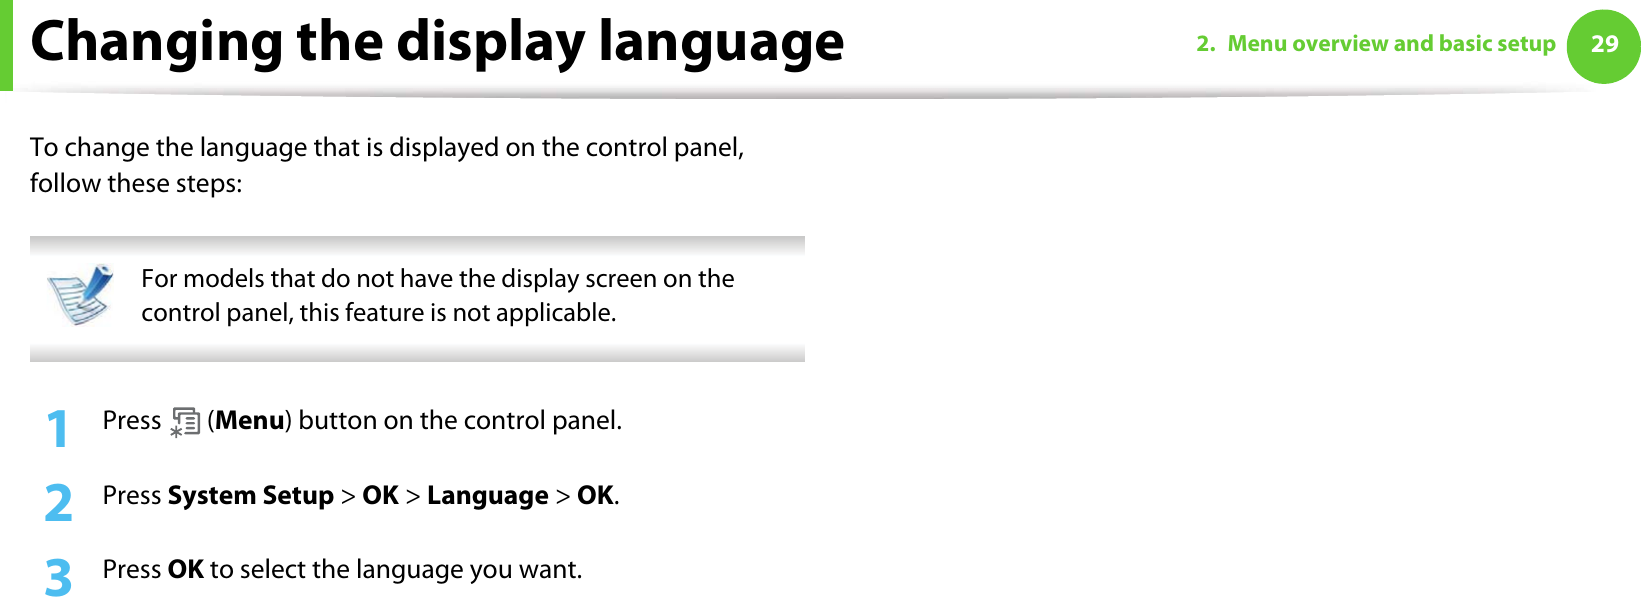 292. Menu overview and basic setupChanging the display languageTo change the language that is displayed on the control panel, follow these steps: For models that do not have the display screen on the control panel, this feature is not applicable. 1Press  (Menu) button on the control panel.2  Press System Setup &gt; OK &gt; Language &gt; OK.3  Press OK to select the language you want.